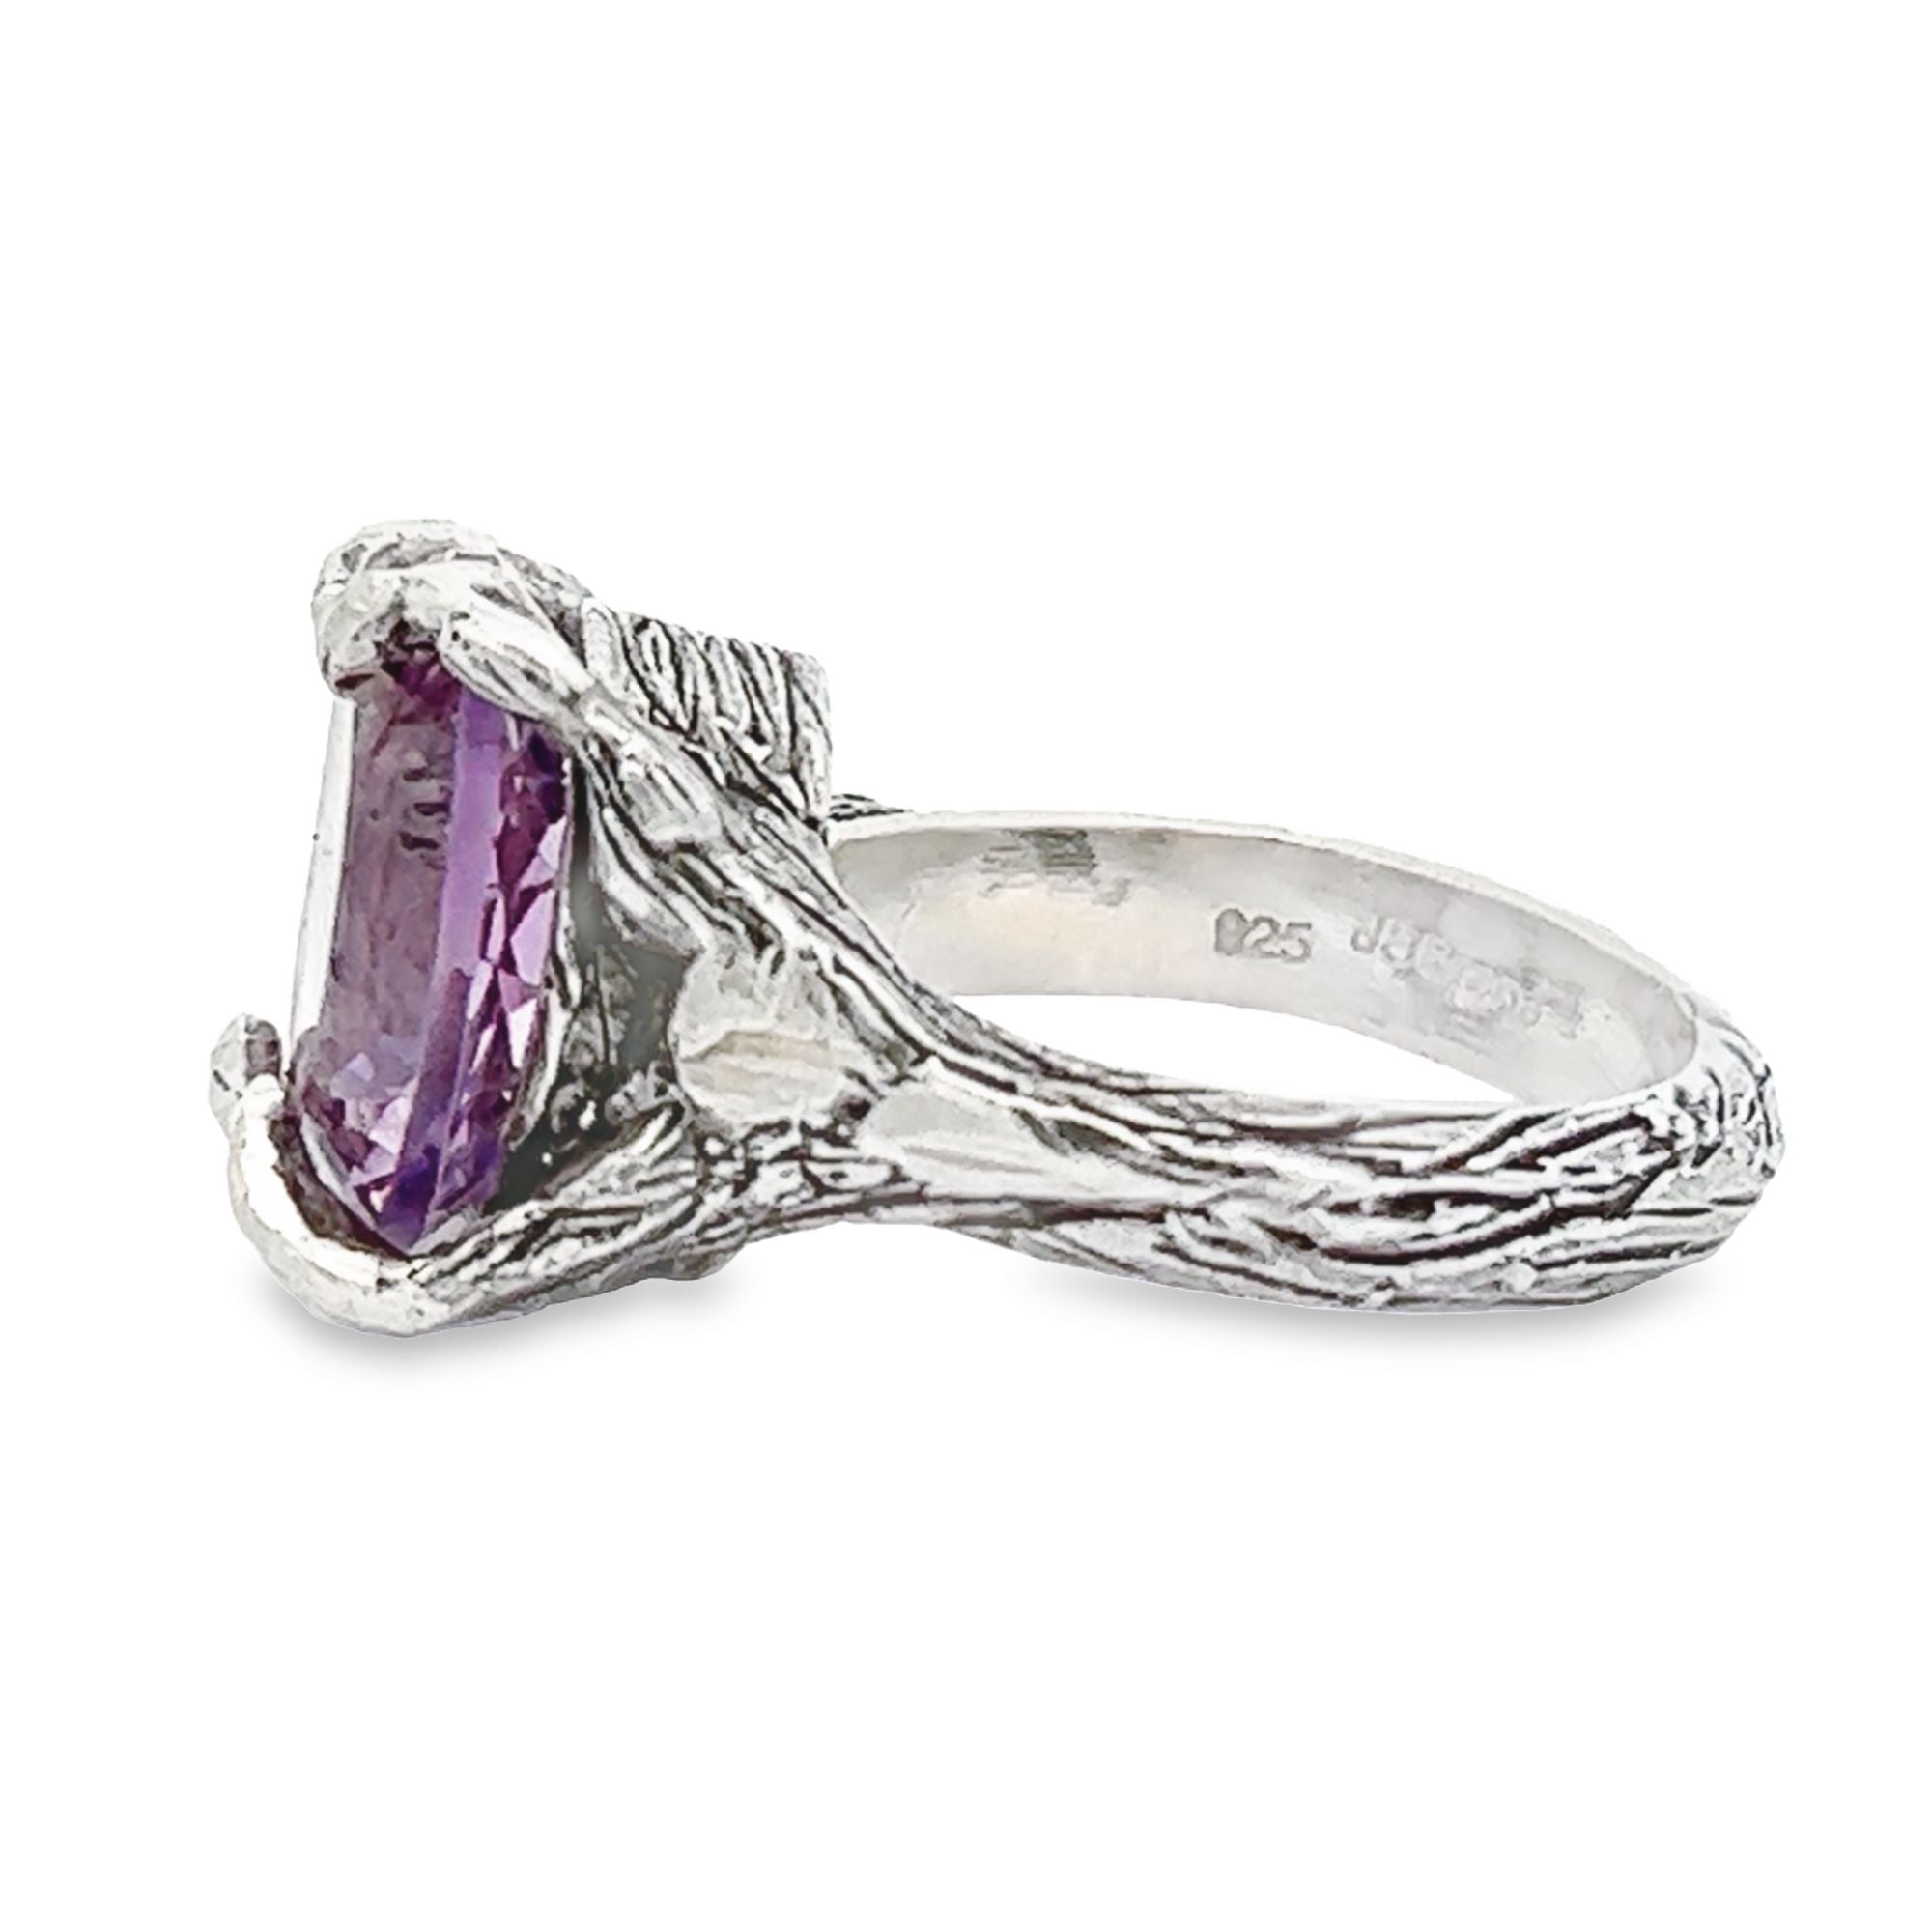 Detail View of Amethyst Sterling Silver Cocktail Ring